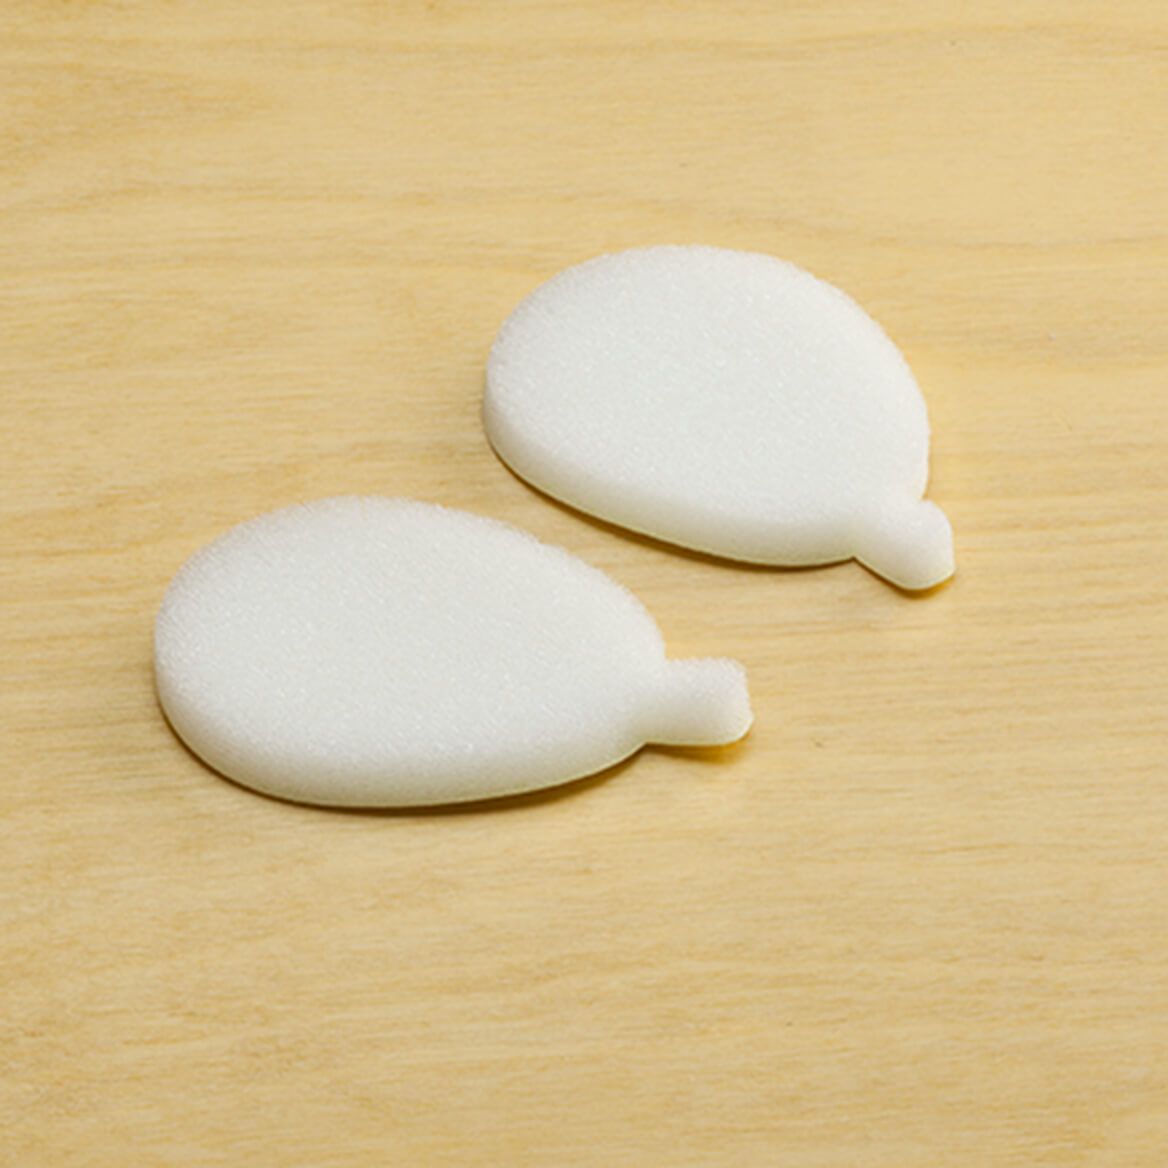 Lotion Applicator Refill Pads, Set of 2 + '-' + 302575